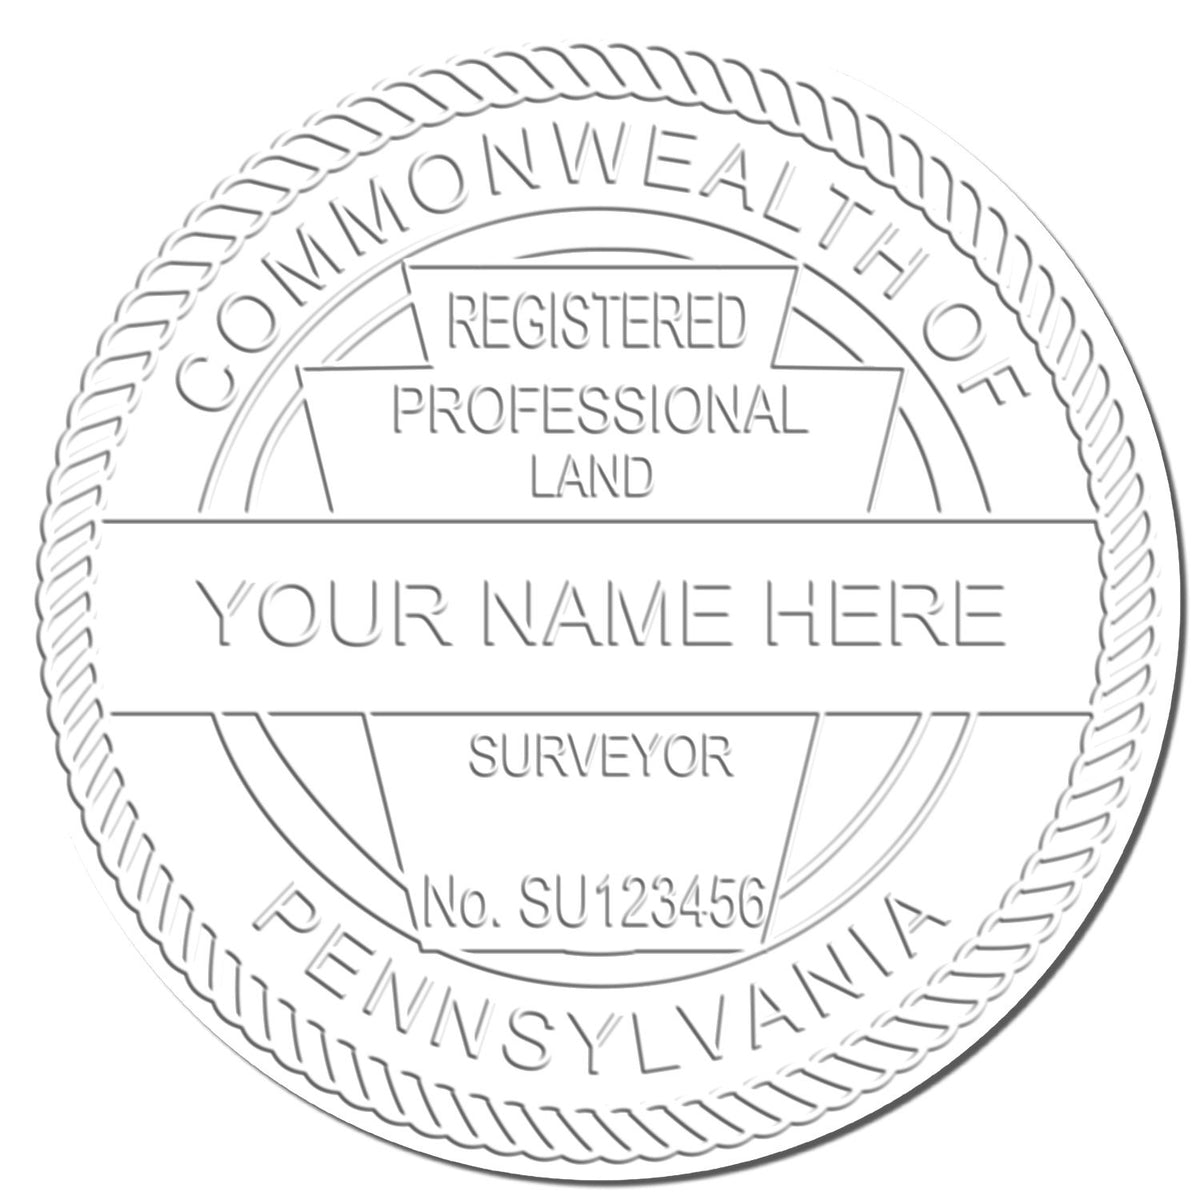 This paper is stamped with a sample imprint of the Gift Pennsylvania Land Surveyor Seal, signifying its quality and reliability.